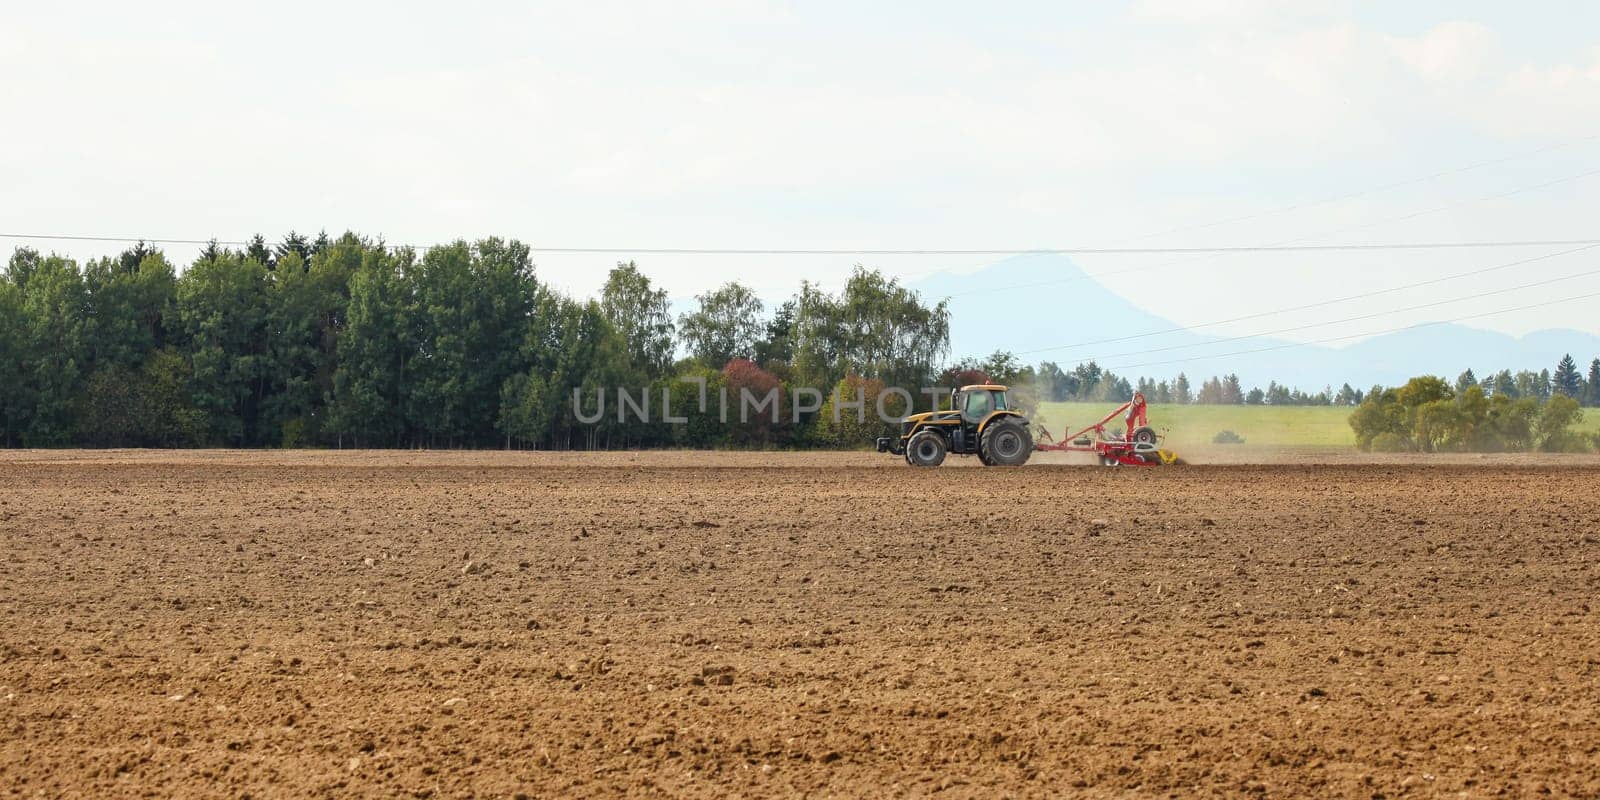 Tractor sowing in empty field on countryside with some mountains in background. by Ivanko